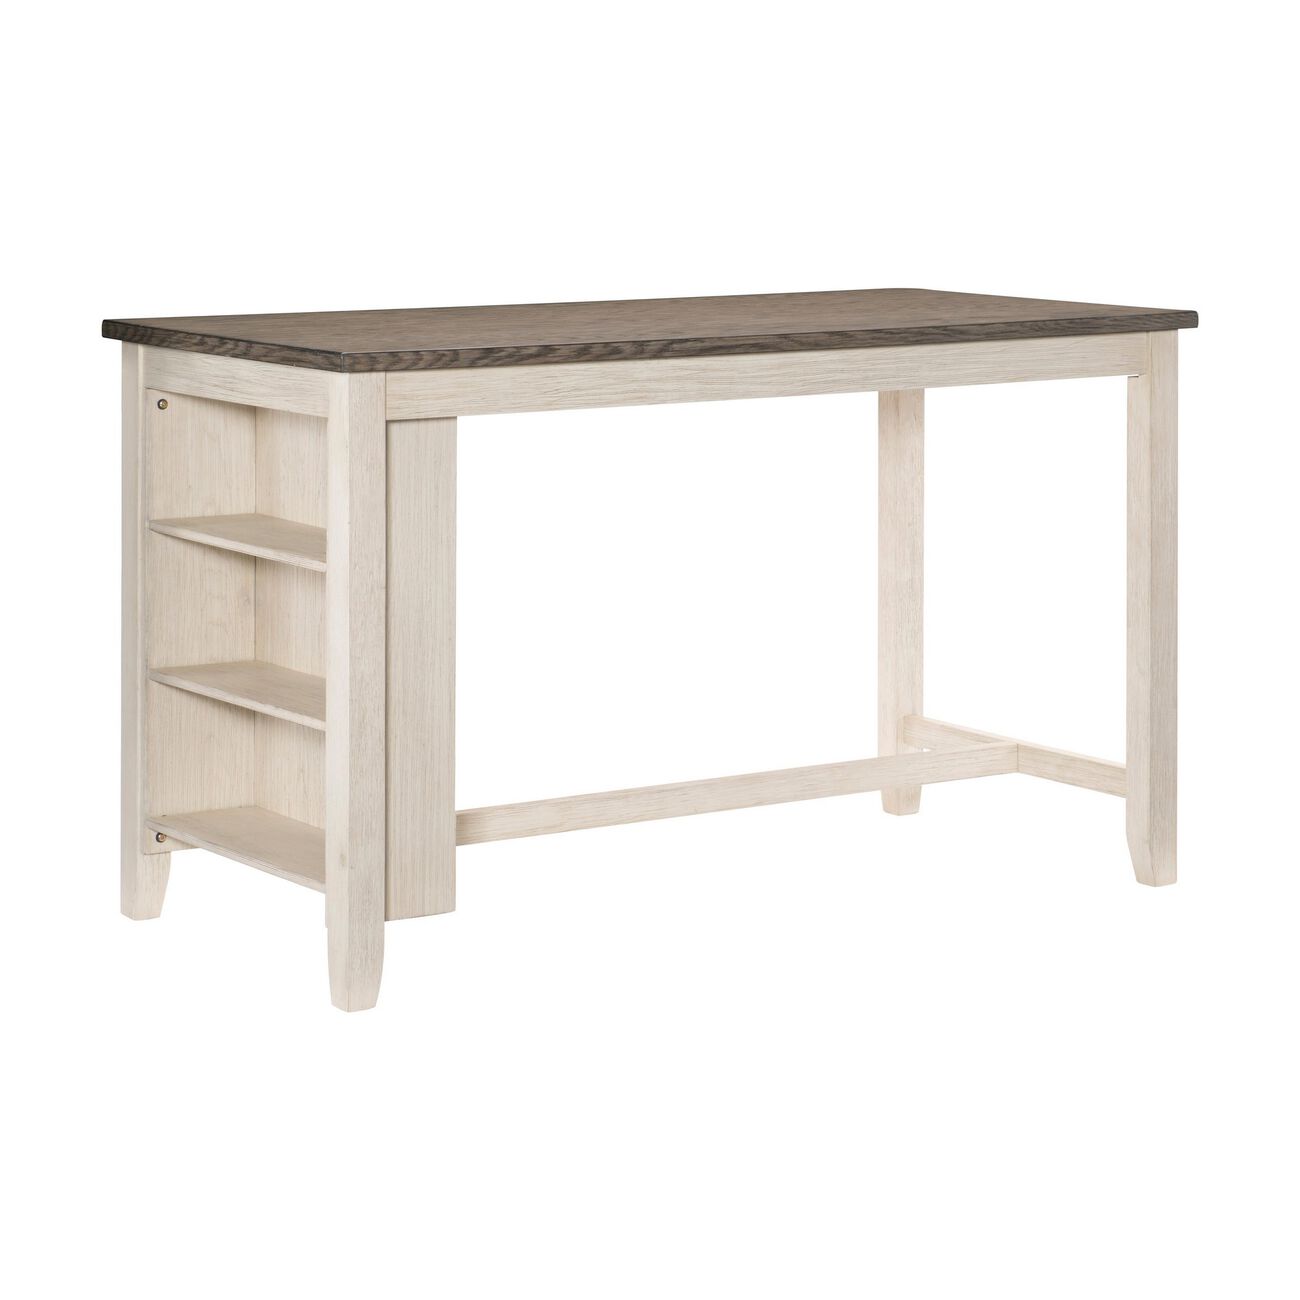 Wooden Counter Height Table with 3 Shelves, Antique White and Gray